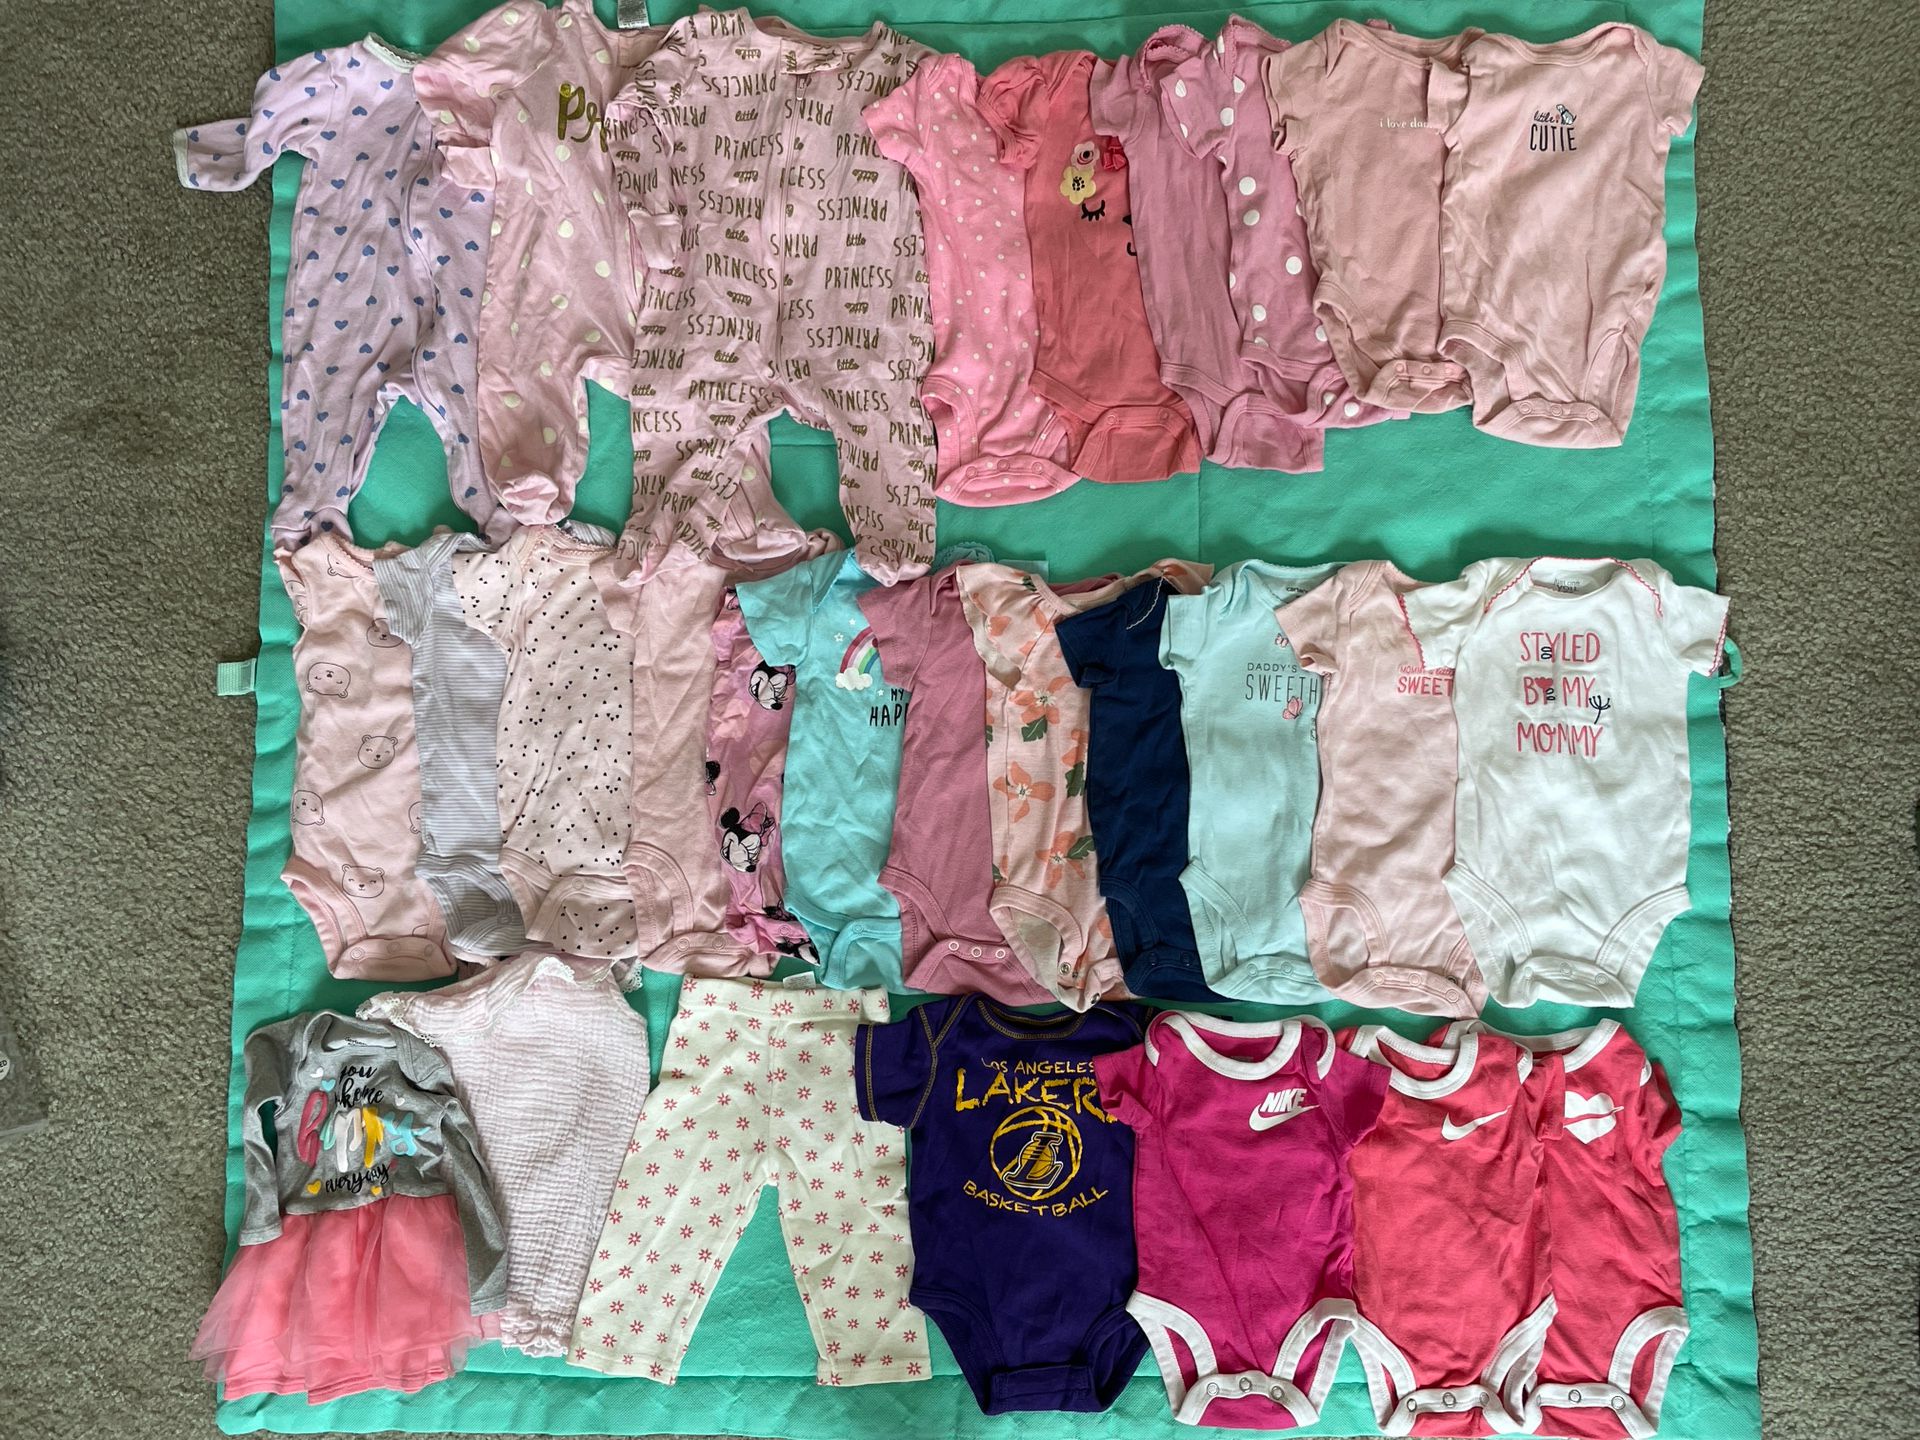 Huge big lot of baby girl clothing 0-3 months 